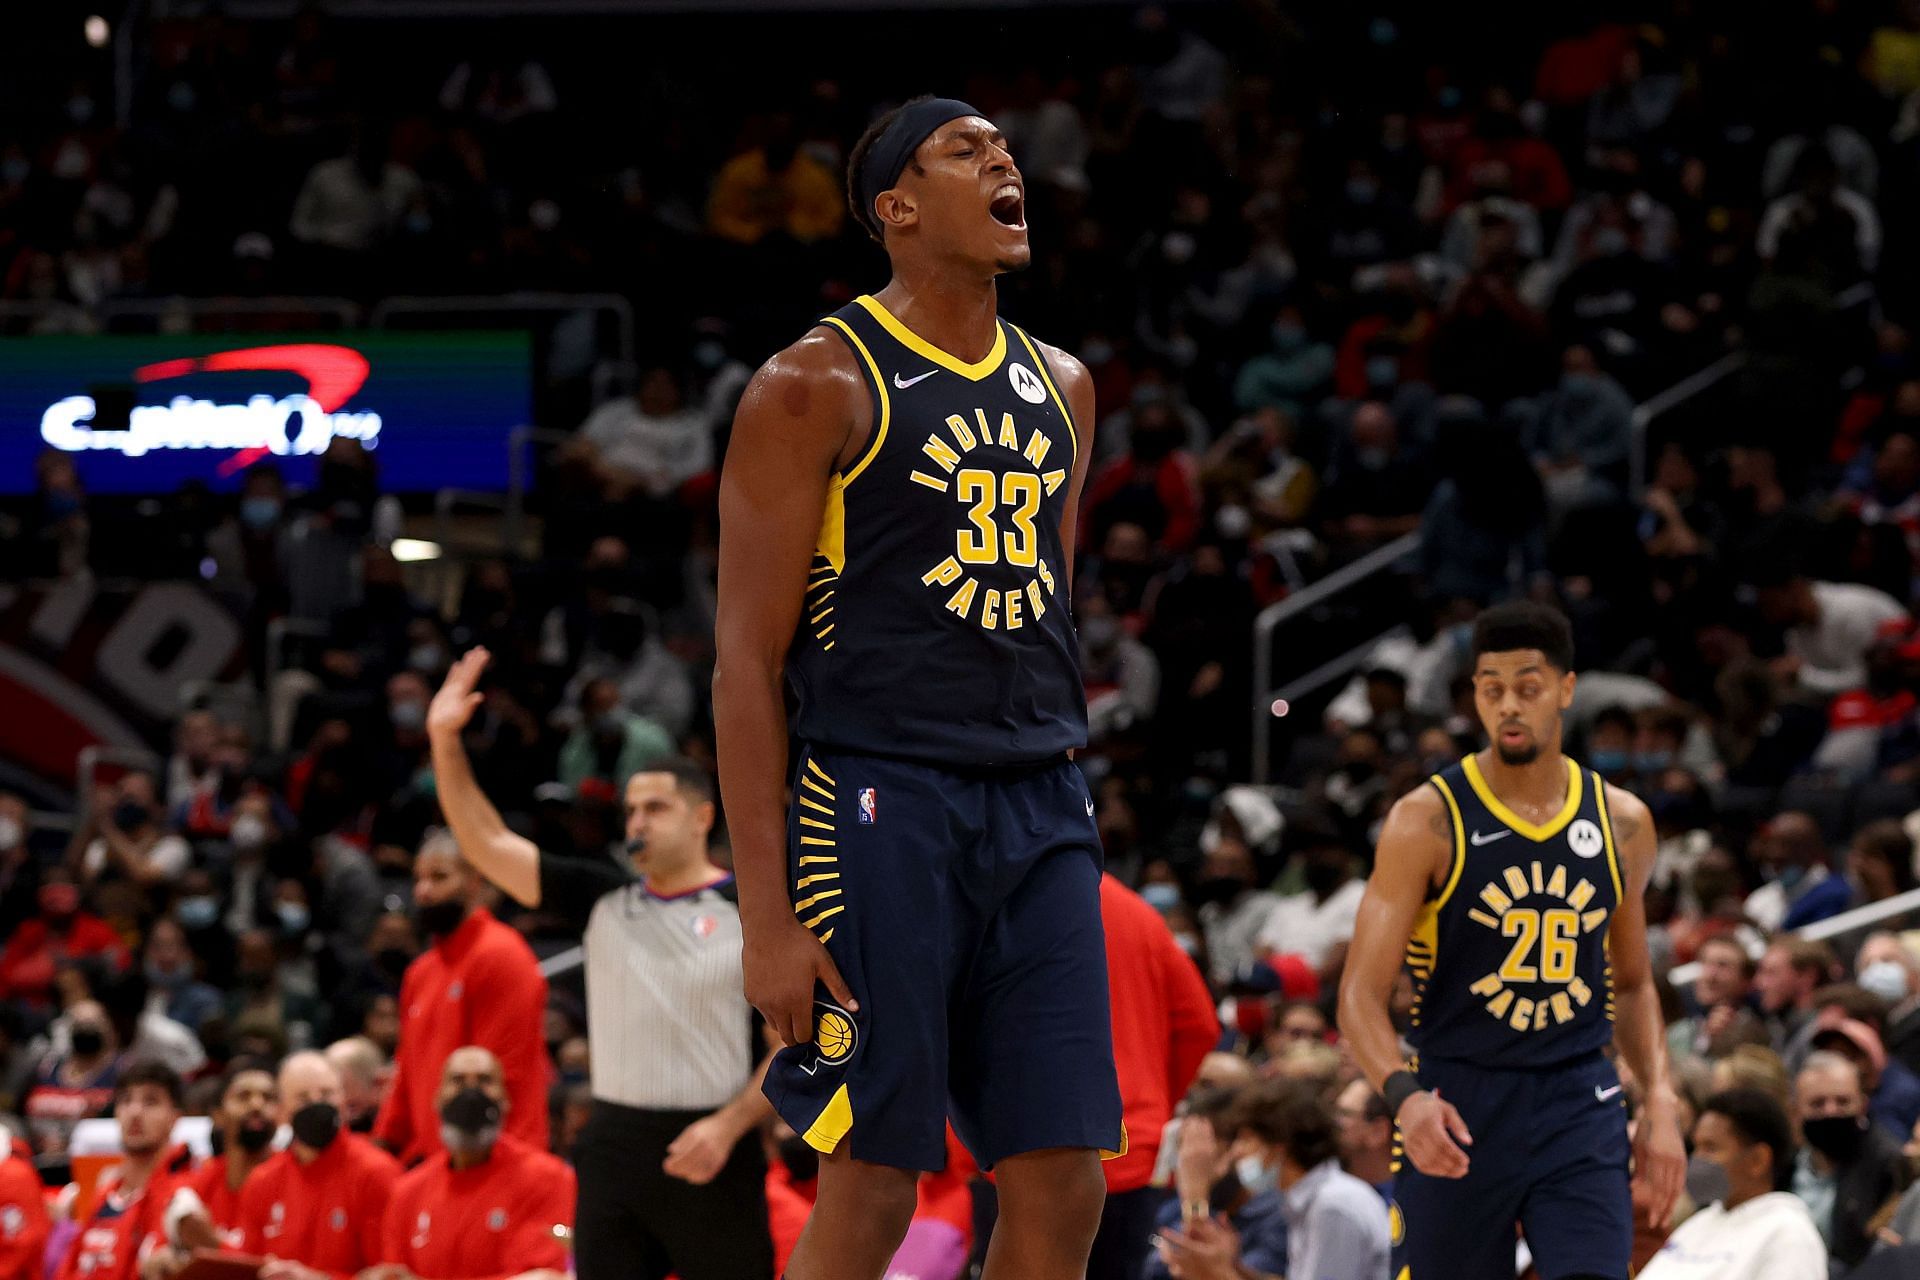 Indiana Pacers big man Myles Turner is off to another great start on defense